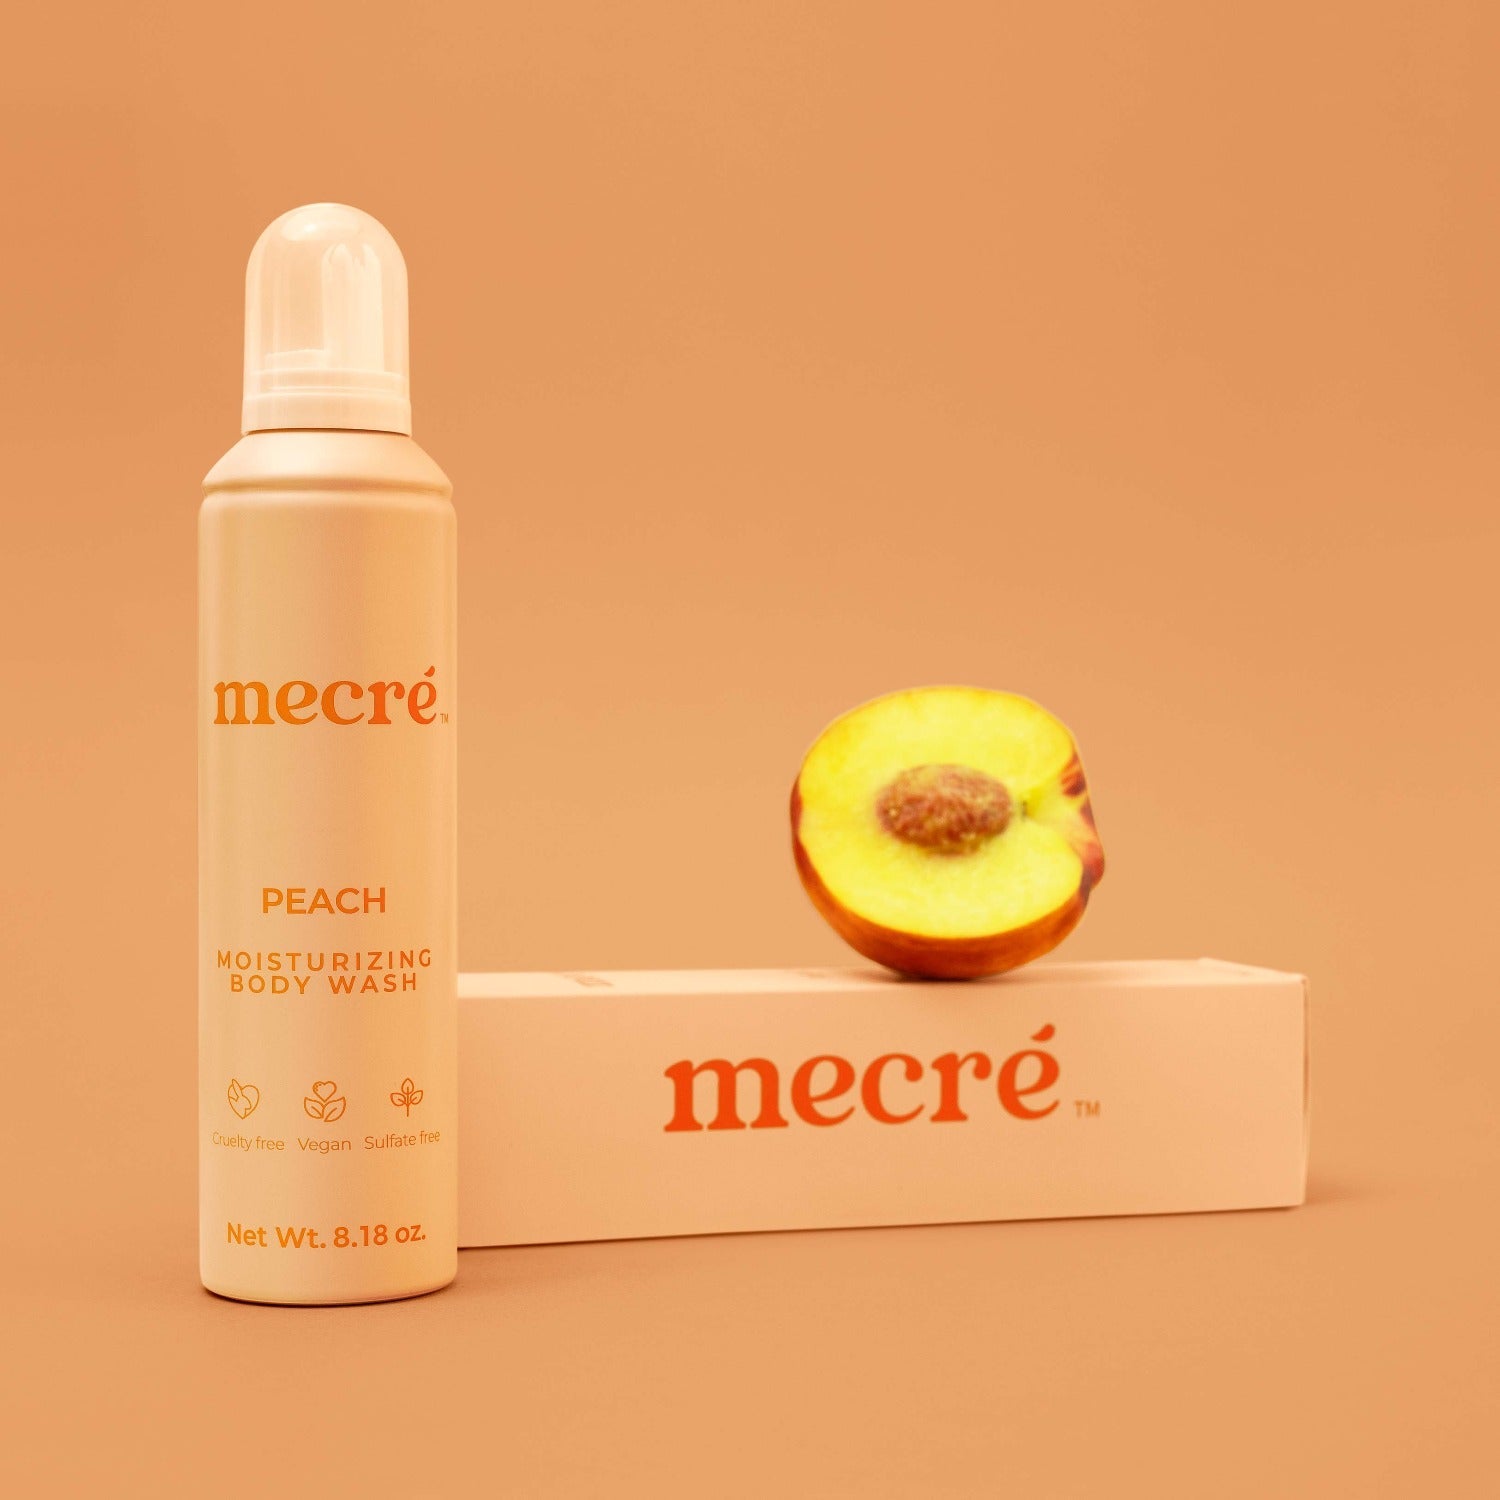 Front view of Mecré moisturizing body wash in peach scent, displayed with its packaging and half peach.